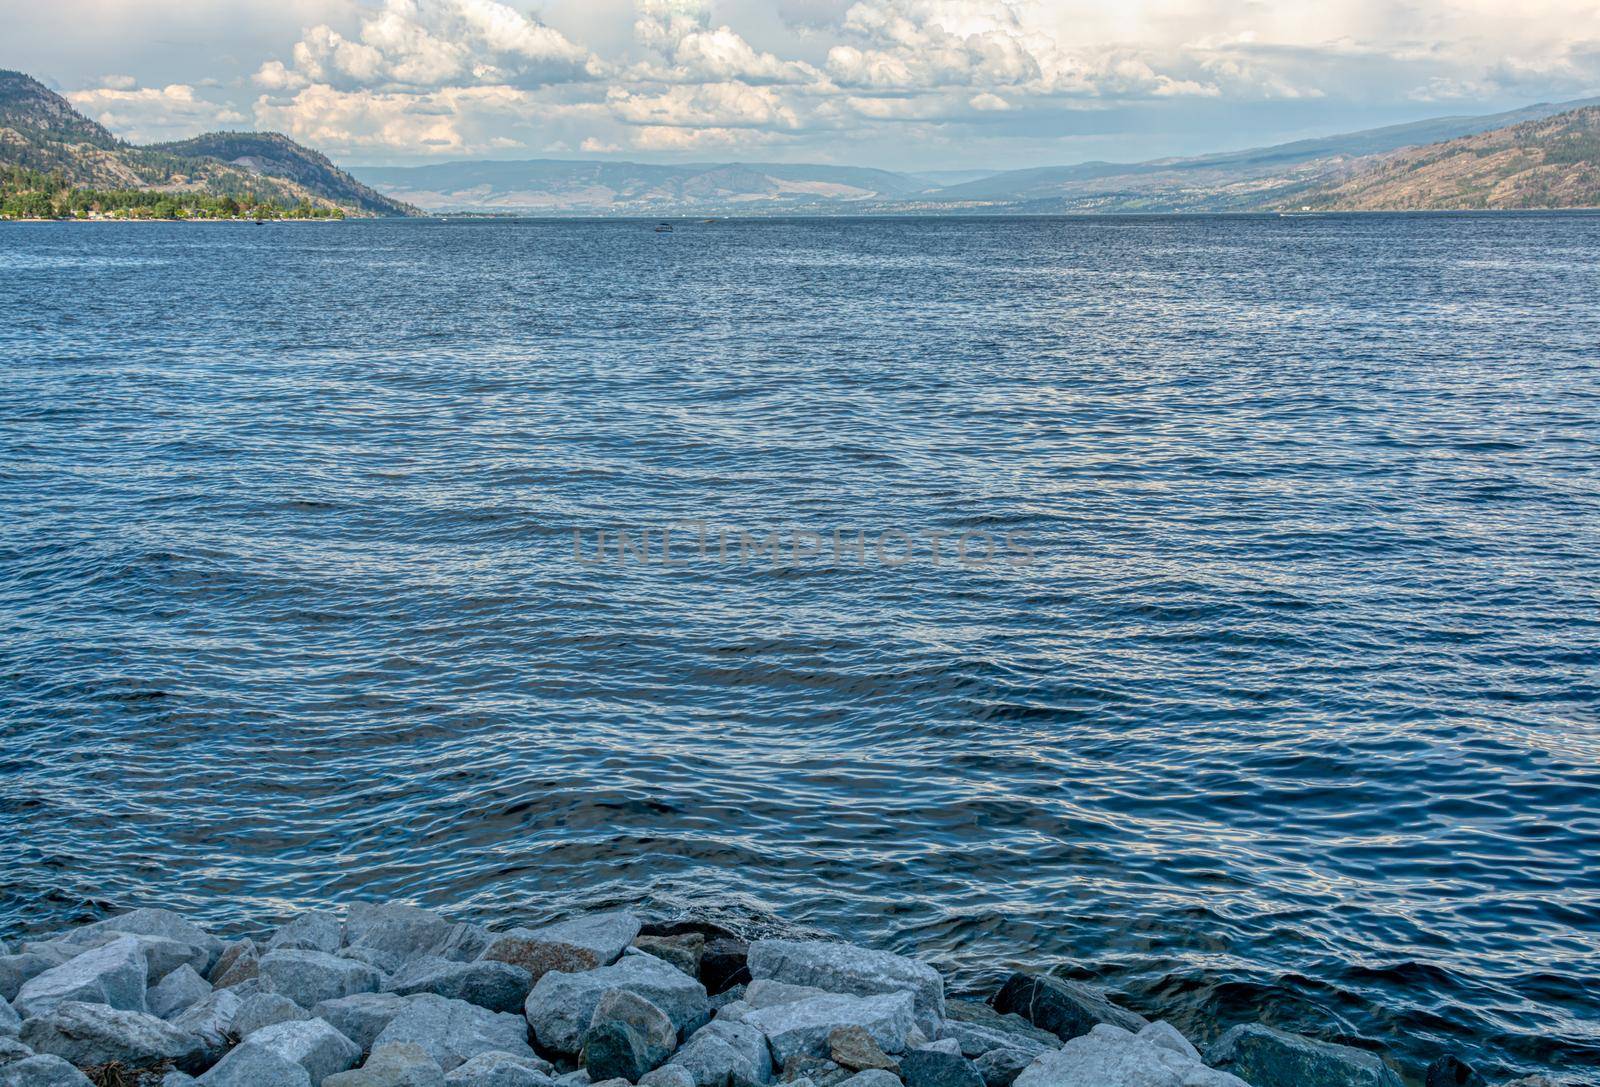 Okanagan lake overview on a bright summer day by Imagenet